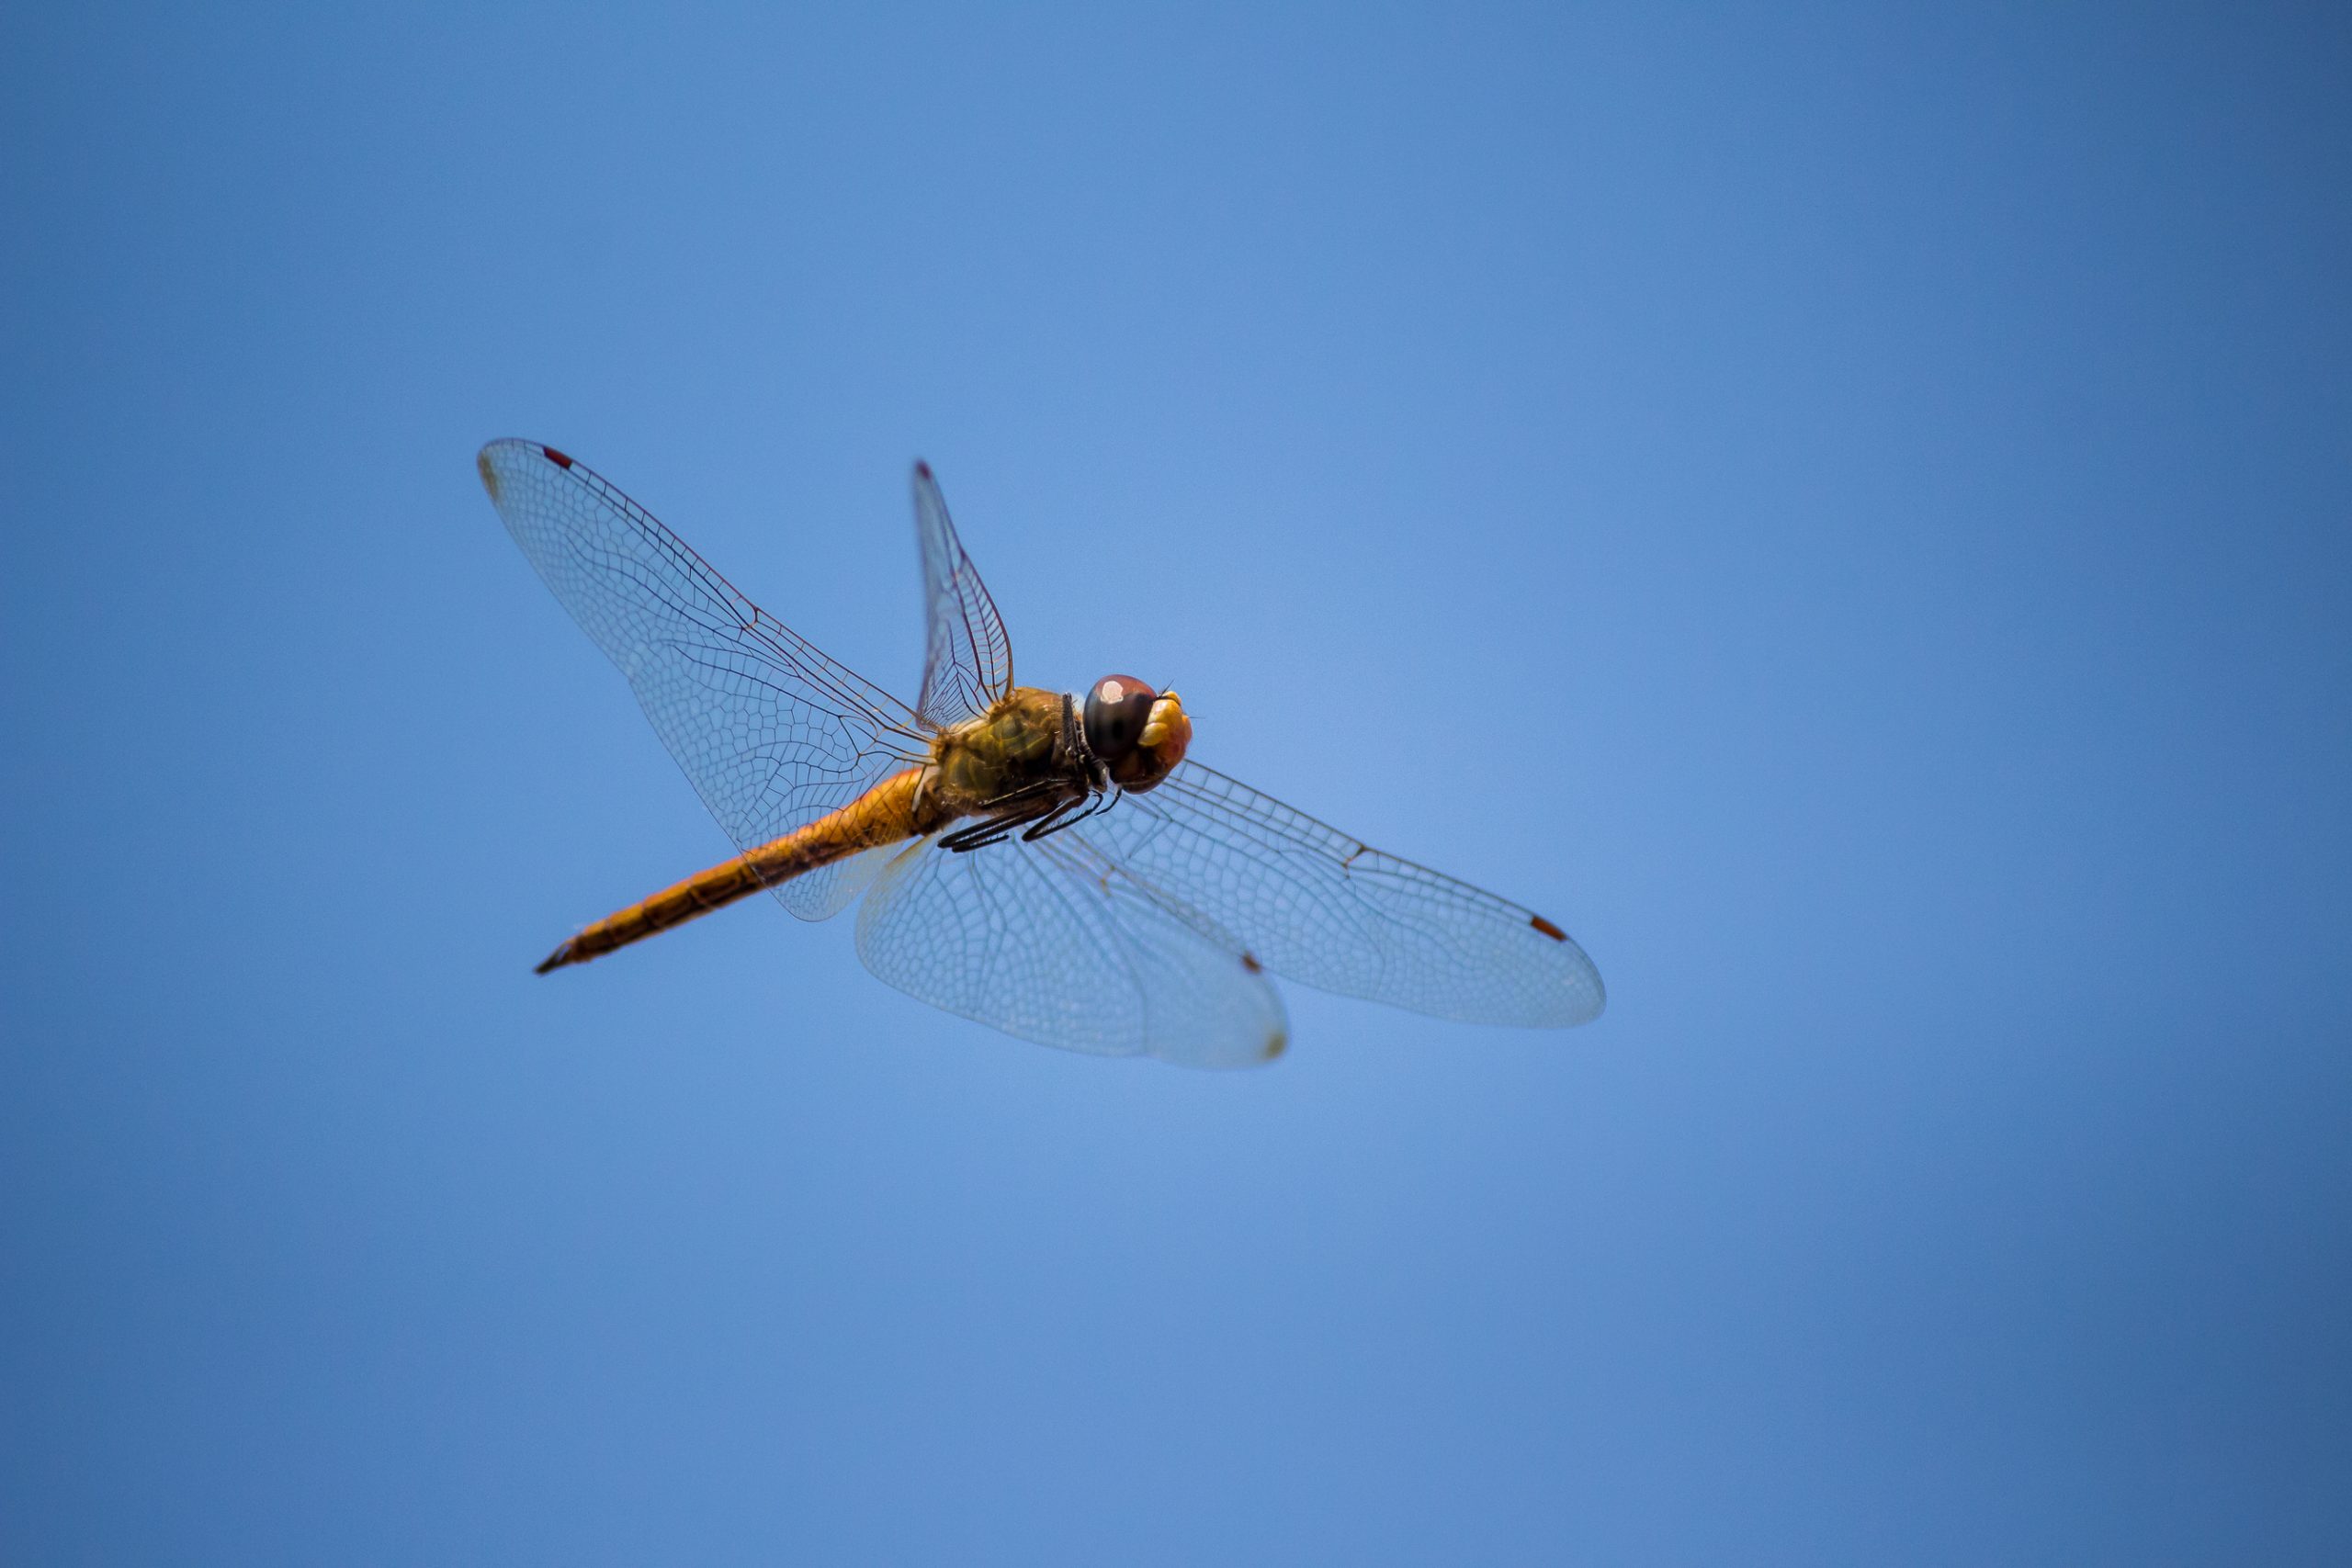 Dragonfly flying in the sky